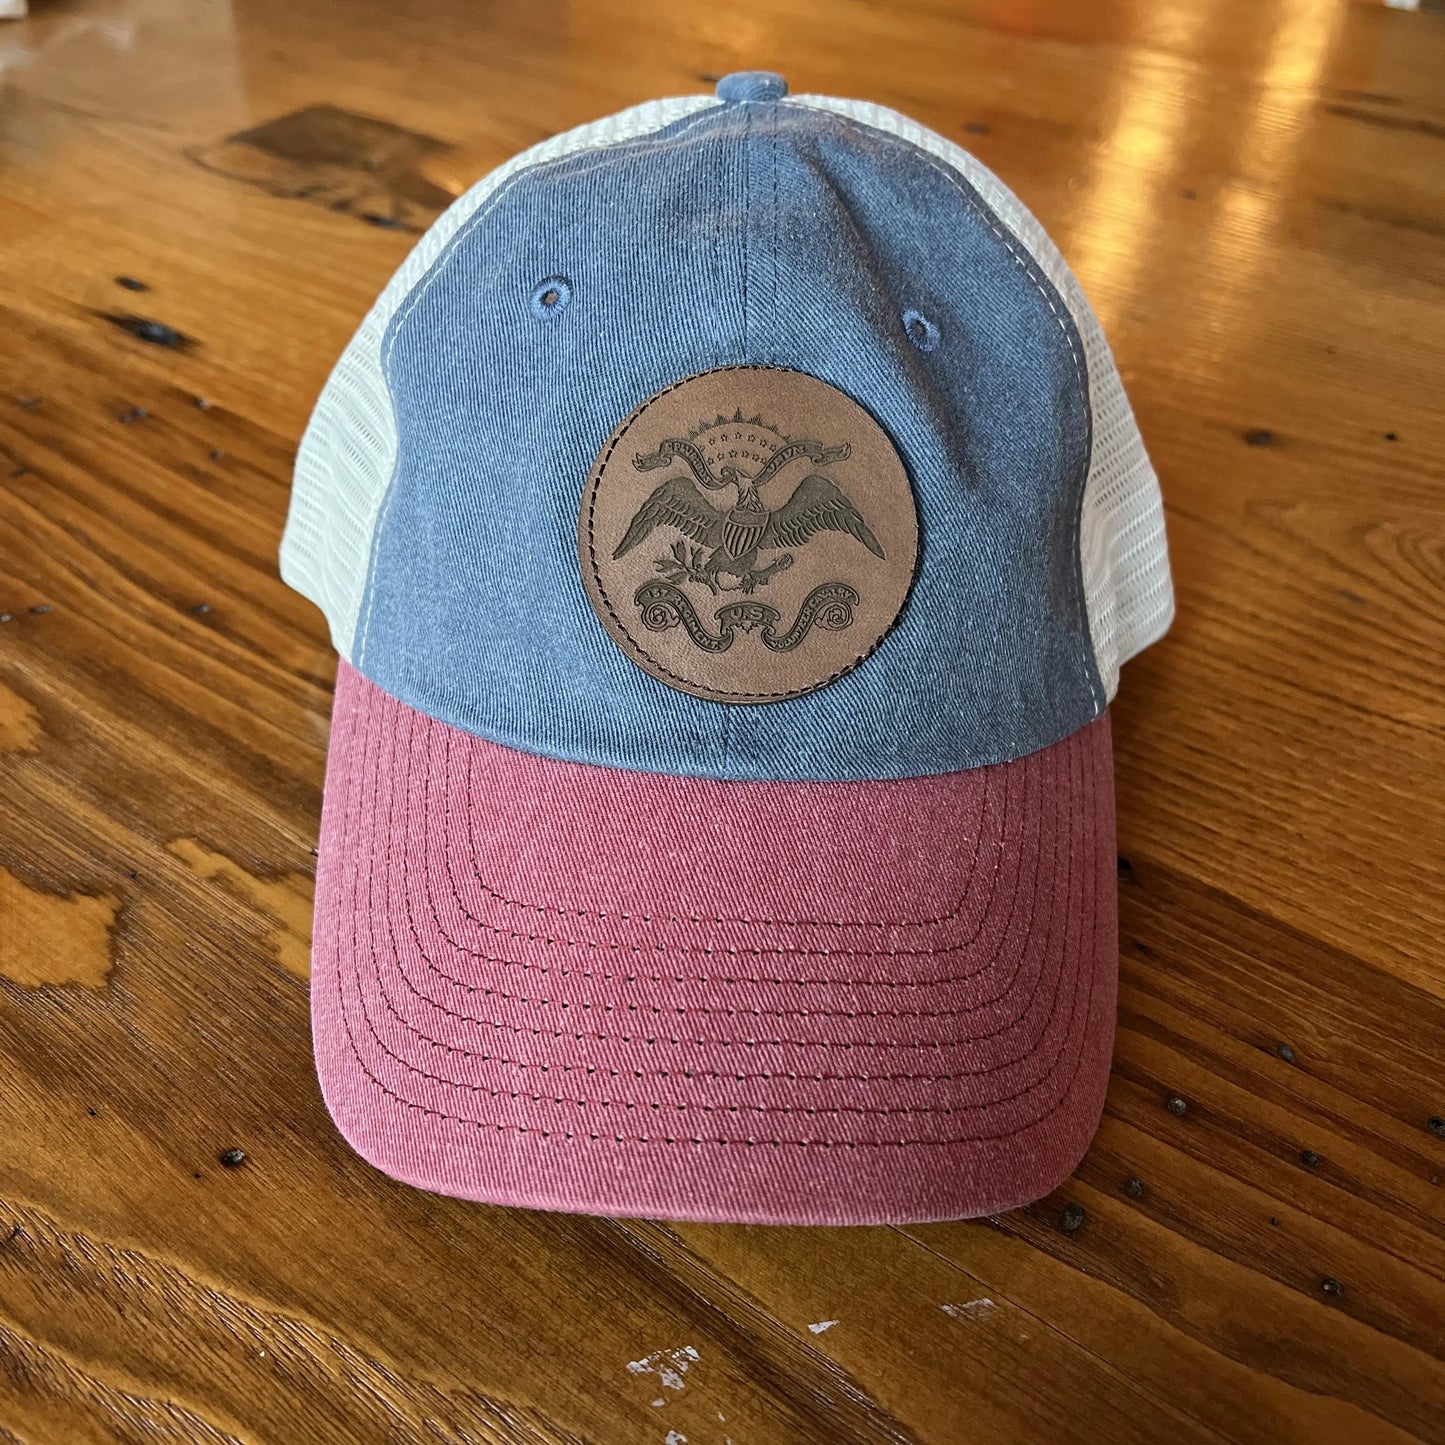 Teddy Roosevelt "Rough Riders" Leather patch cap